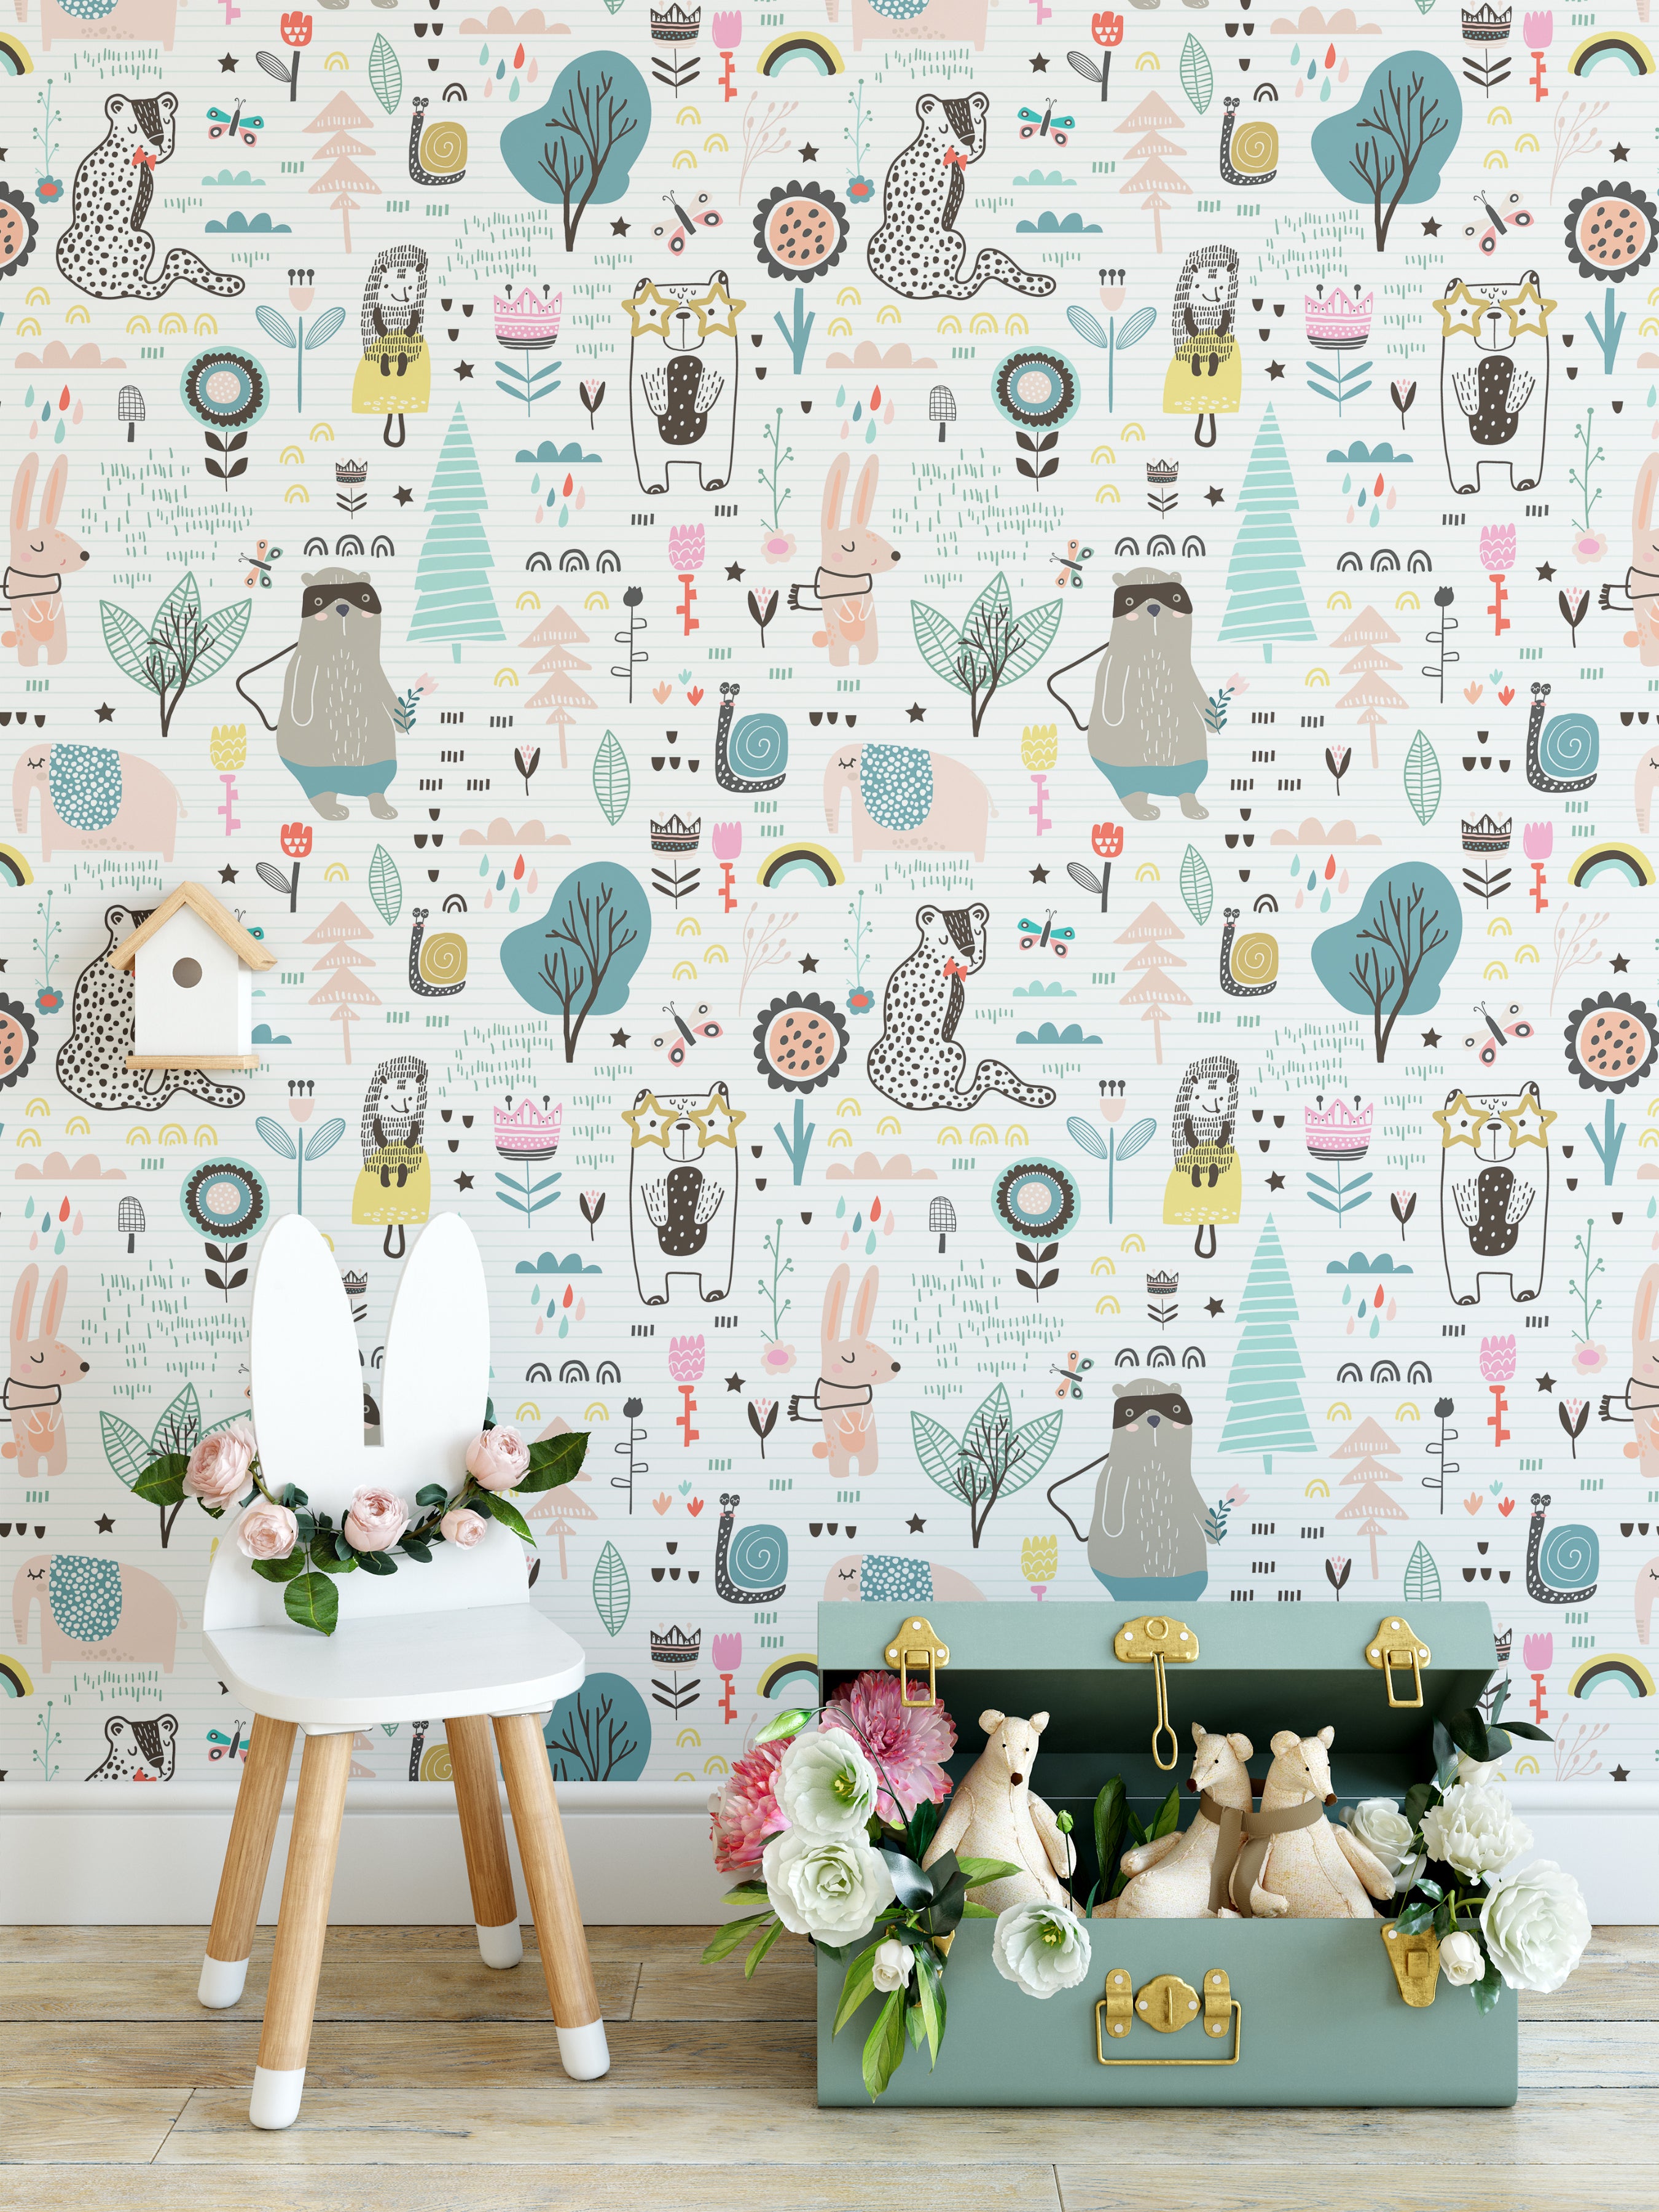 A vibrant children's playroom with walls adorned with "Animal Sketches Wallpaper," featuring whimsical illustrations of various animals and nature elements in playful colors. The scene includes a white stool with bunny ears and a green storage box filled with stuffed animals, creating a charming and imaginative space.